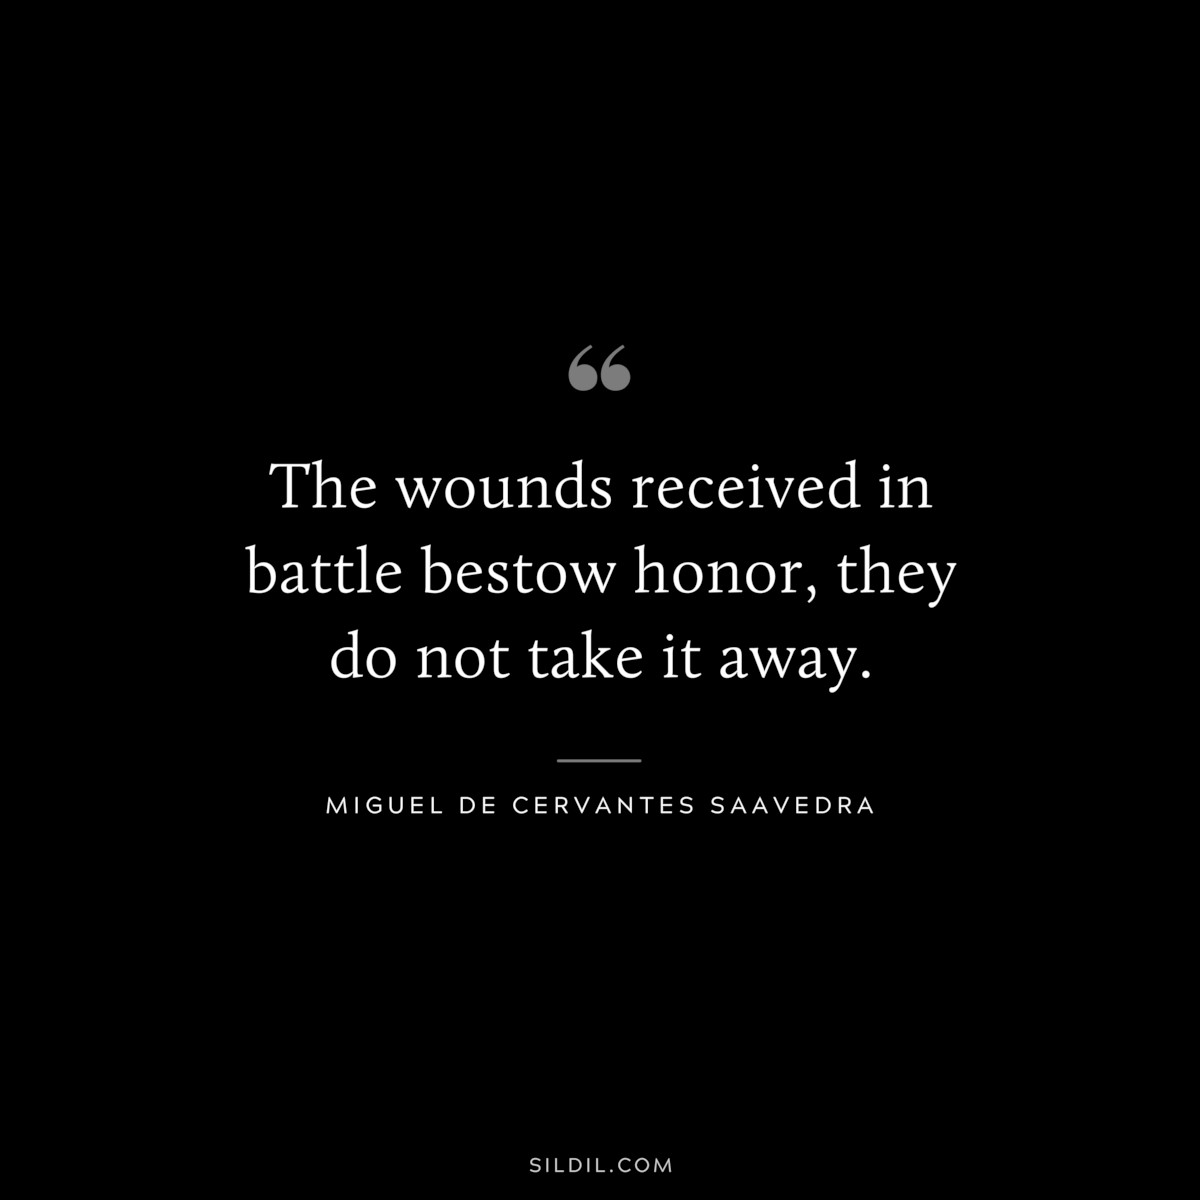 The wounds received in battle bestow honor, they do not take it away. ― Miguel de Cervantes Saavedra